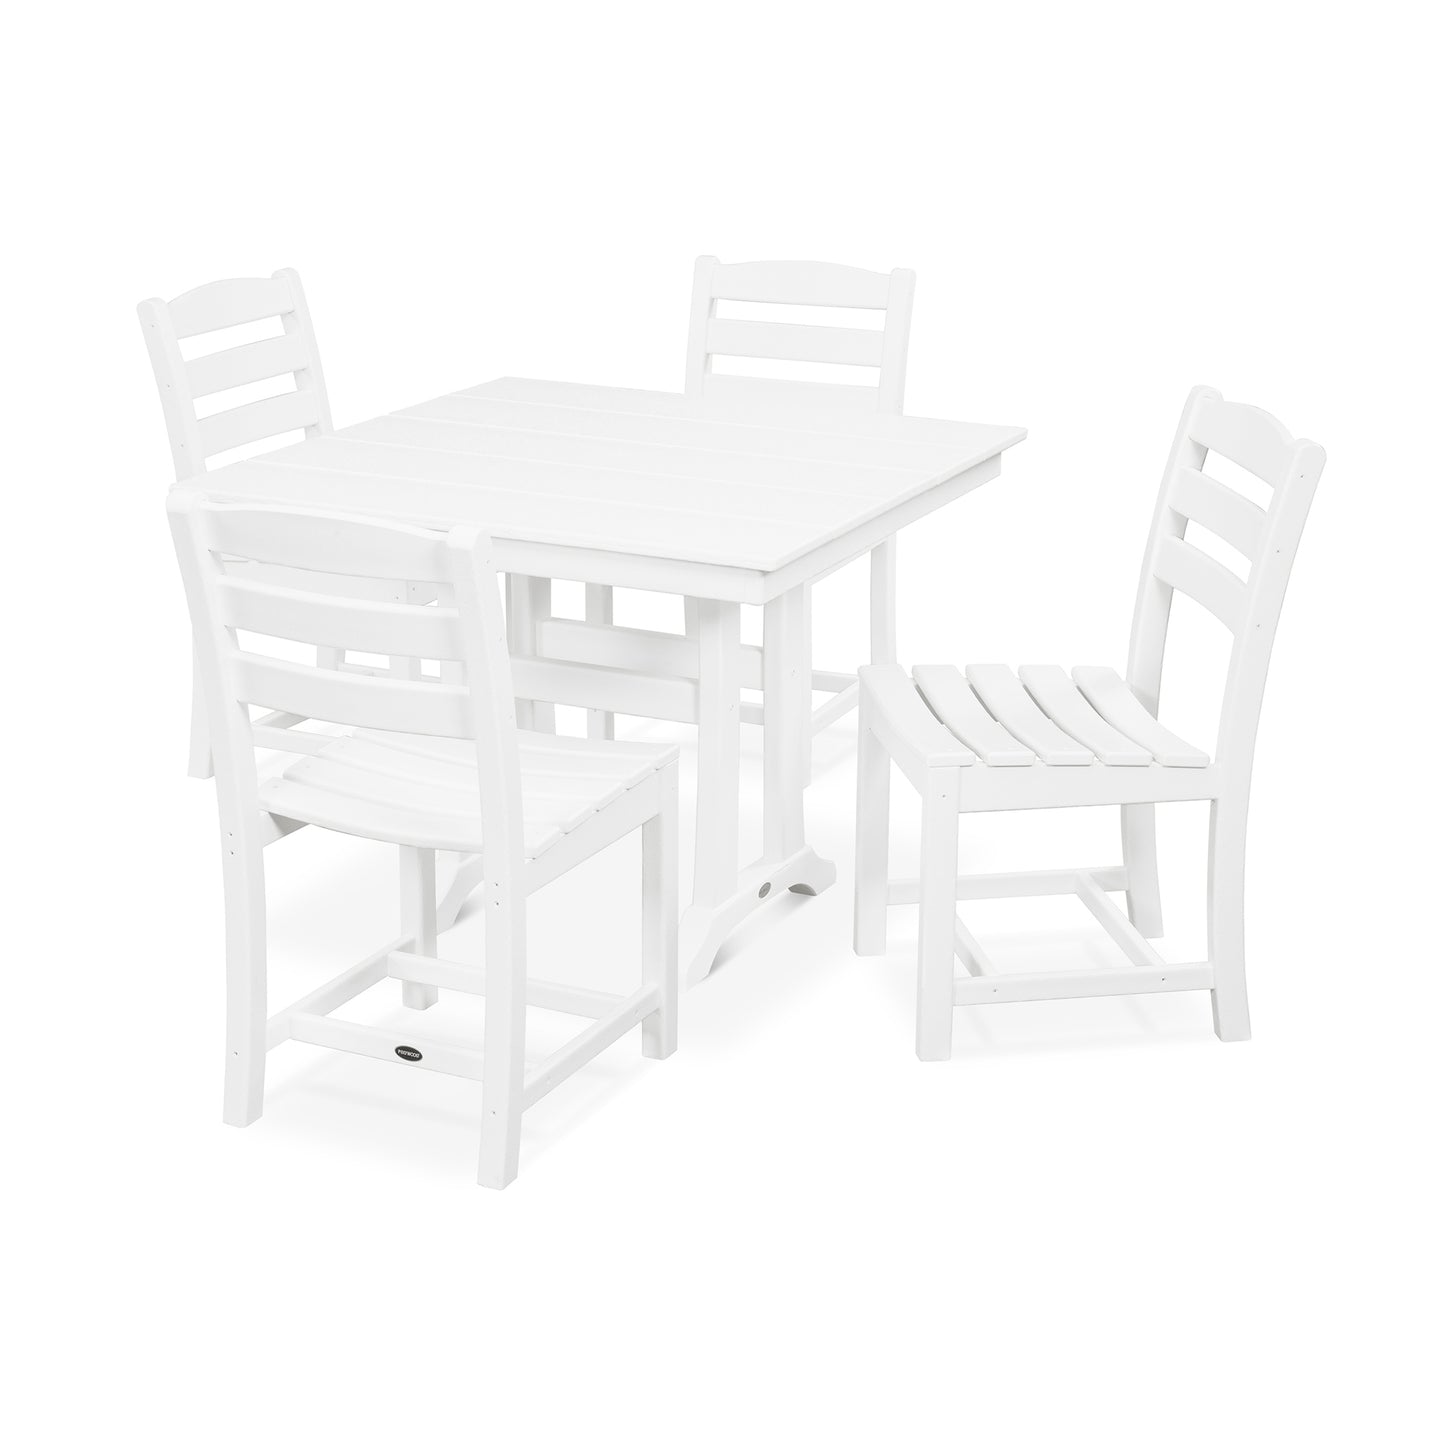 A white POLYWOOD La Casa Café 5-Piece Farmhouse Trestle Side Chair Dining Set featuring a square table and three chairs with vertical slat backs, arranged on a plain white background.